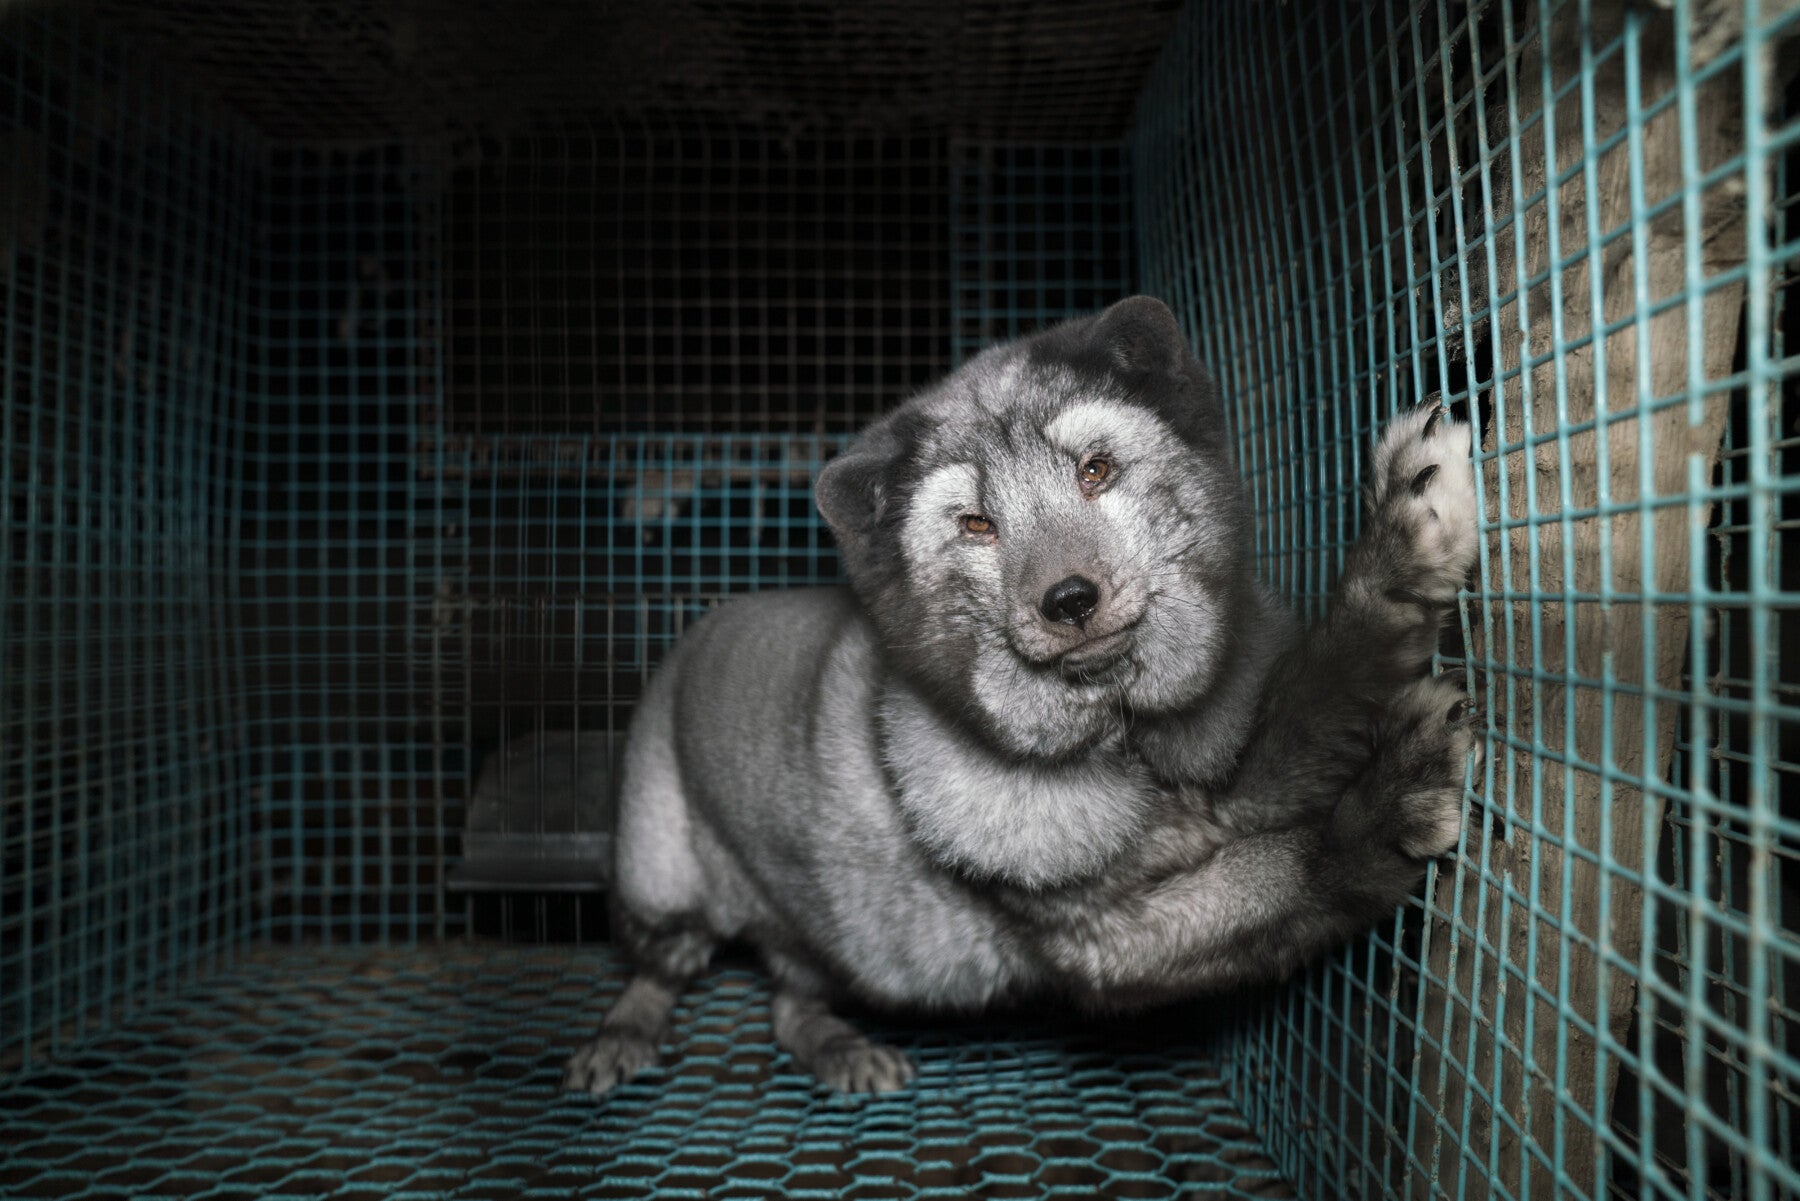 Furnace wipe Mus Harrods' staff tell secret shopper that animals in fur farms 'don't suffer'  and have 'their own private space' 'like Battersea' - Humane Society  International